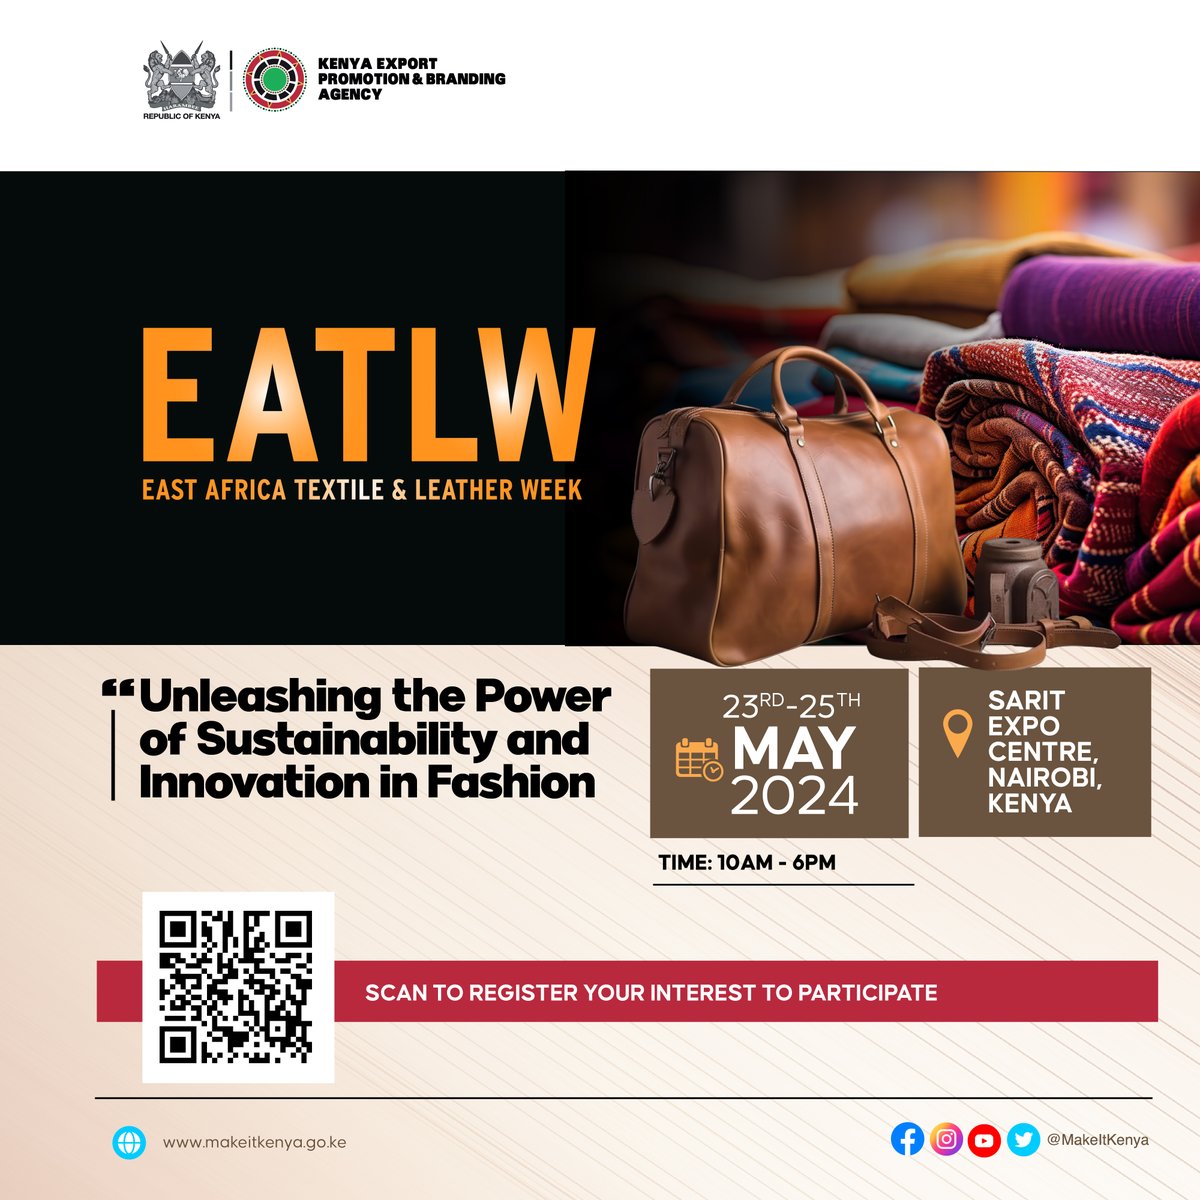 EAST AFRICA TEXTILE AND LEATHER WEEK – EATLW The most exclusive meeting platform for the home textile, leather, accessories, and footwear industry is happening May 23-25, 2024, at the Sarit Expo Center in Nairobi, Kenya. Register here to participate: bit.ly/3W7U7V9